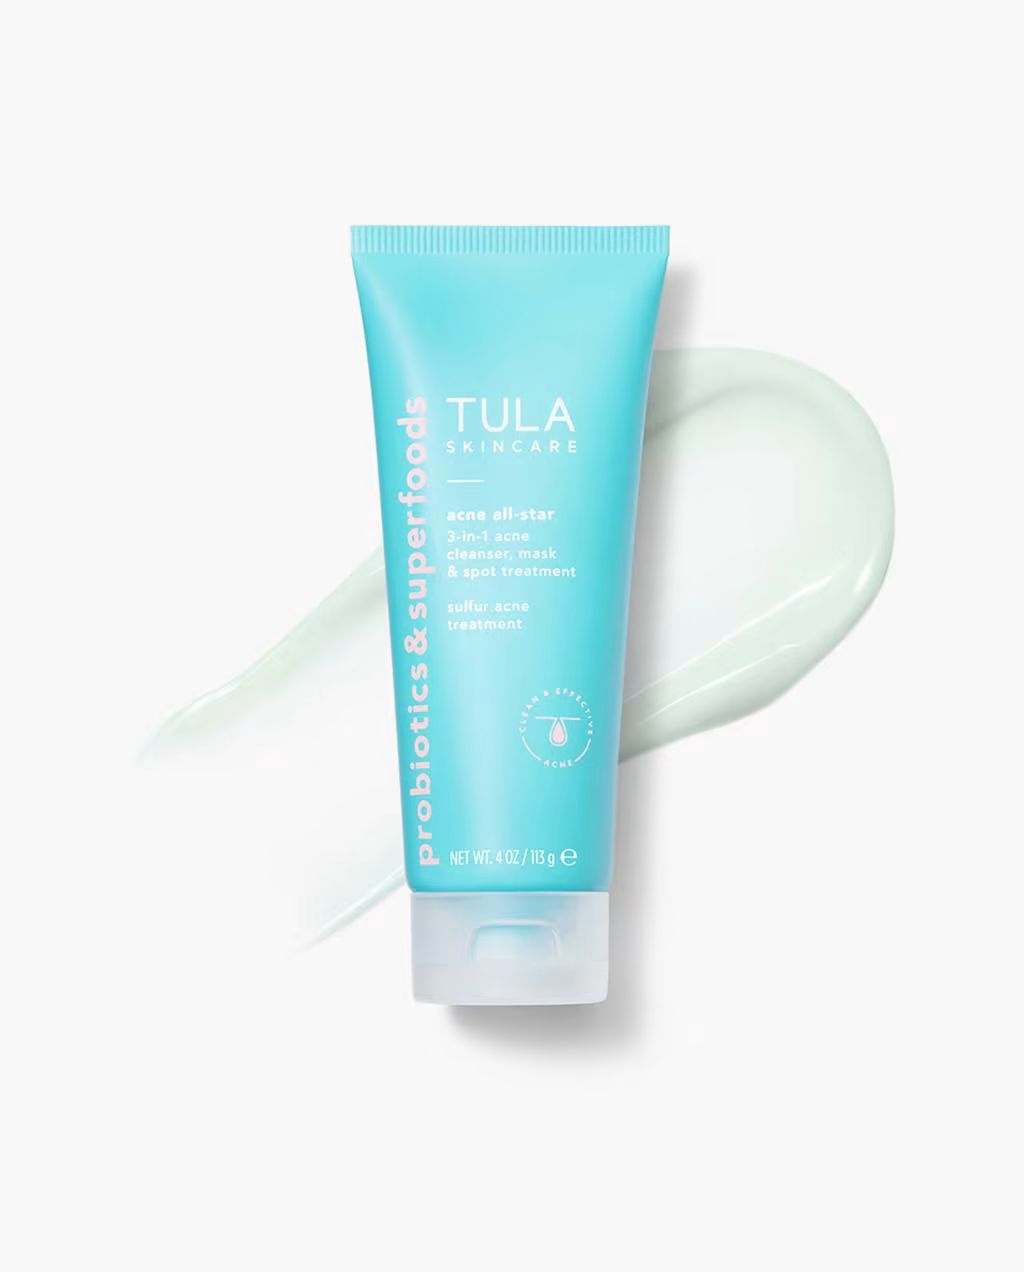 3-in-1 acne cleanser, mask & spot treatment | Tula Skincare